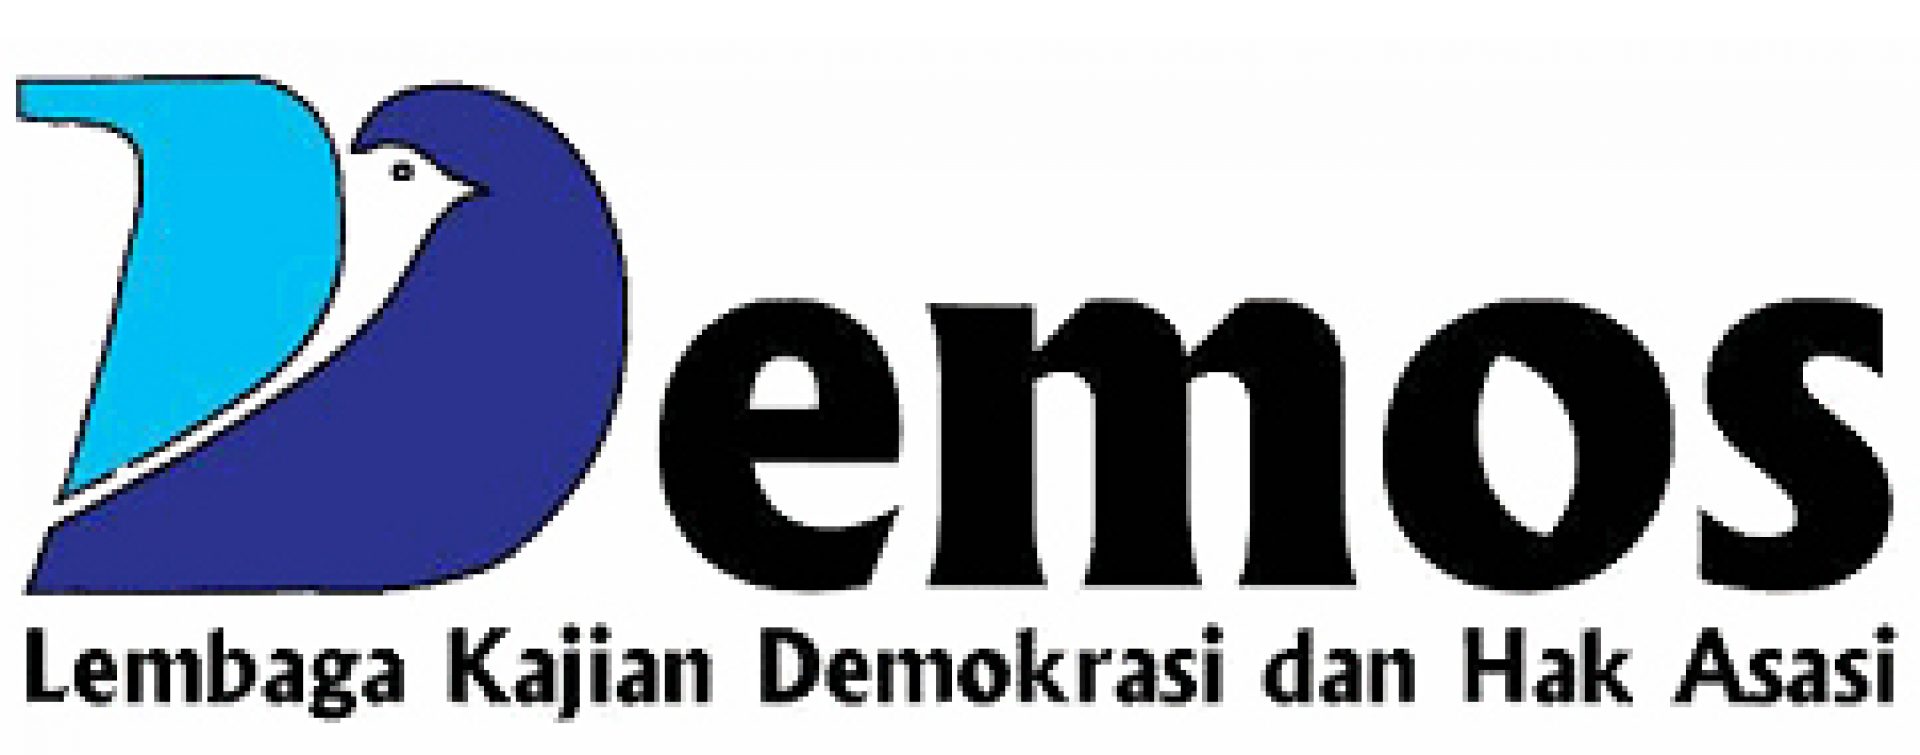 Indonesian Centre for Democracy and Human Rights